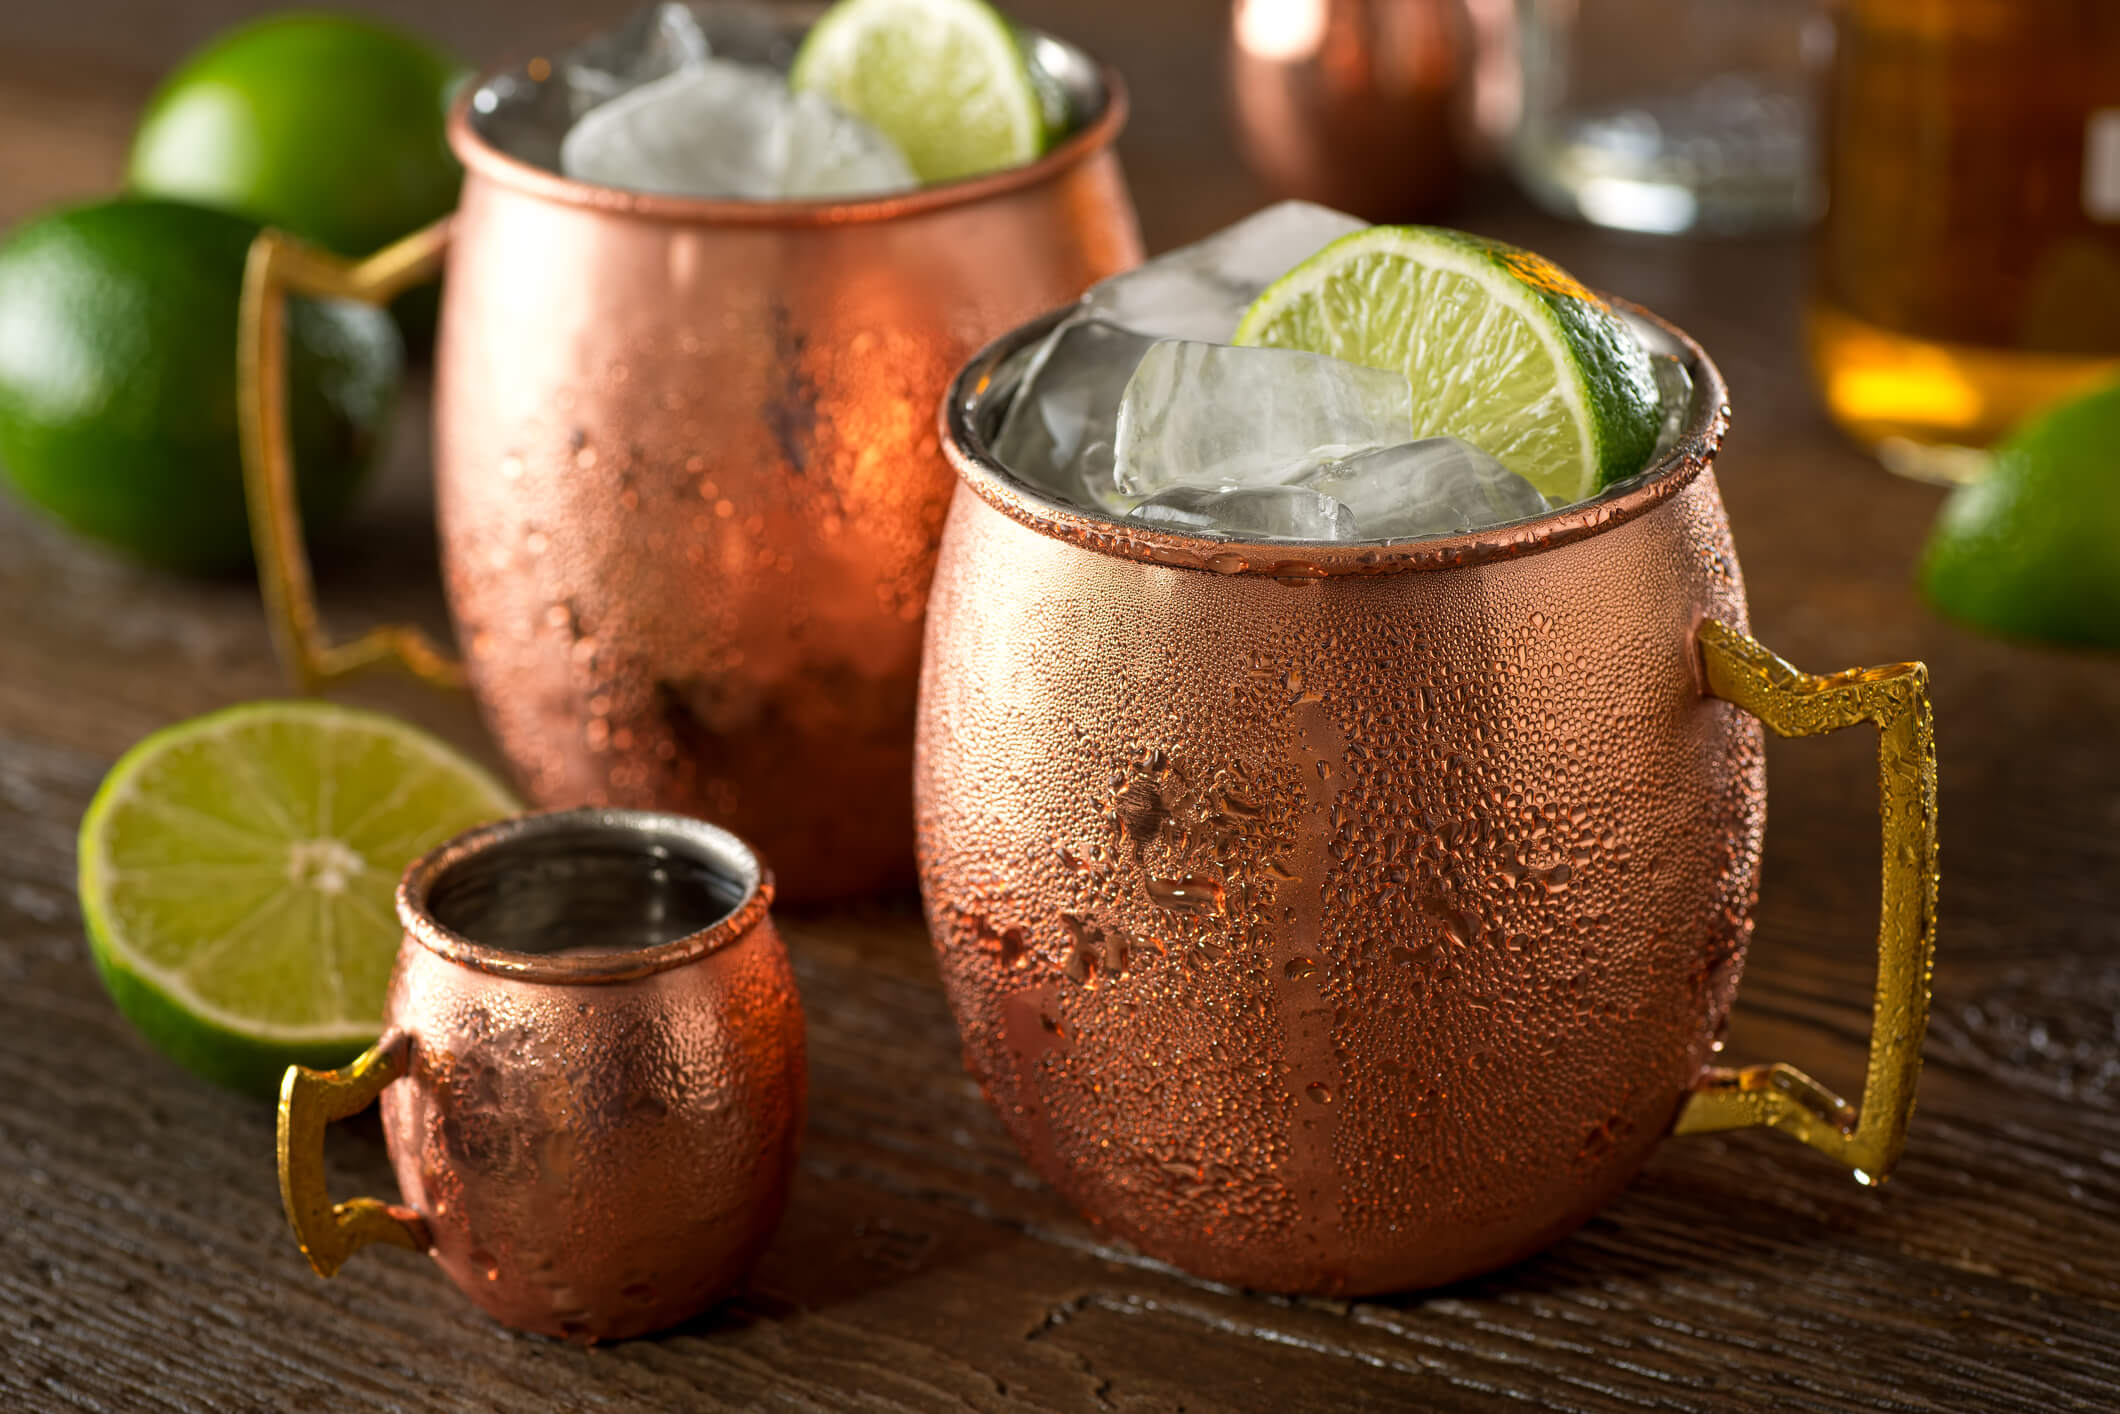 Mini Moscow Mule and full-size Moscow Mules